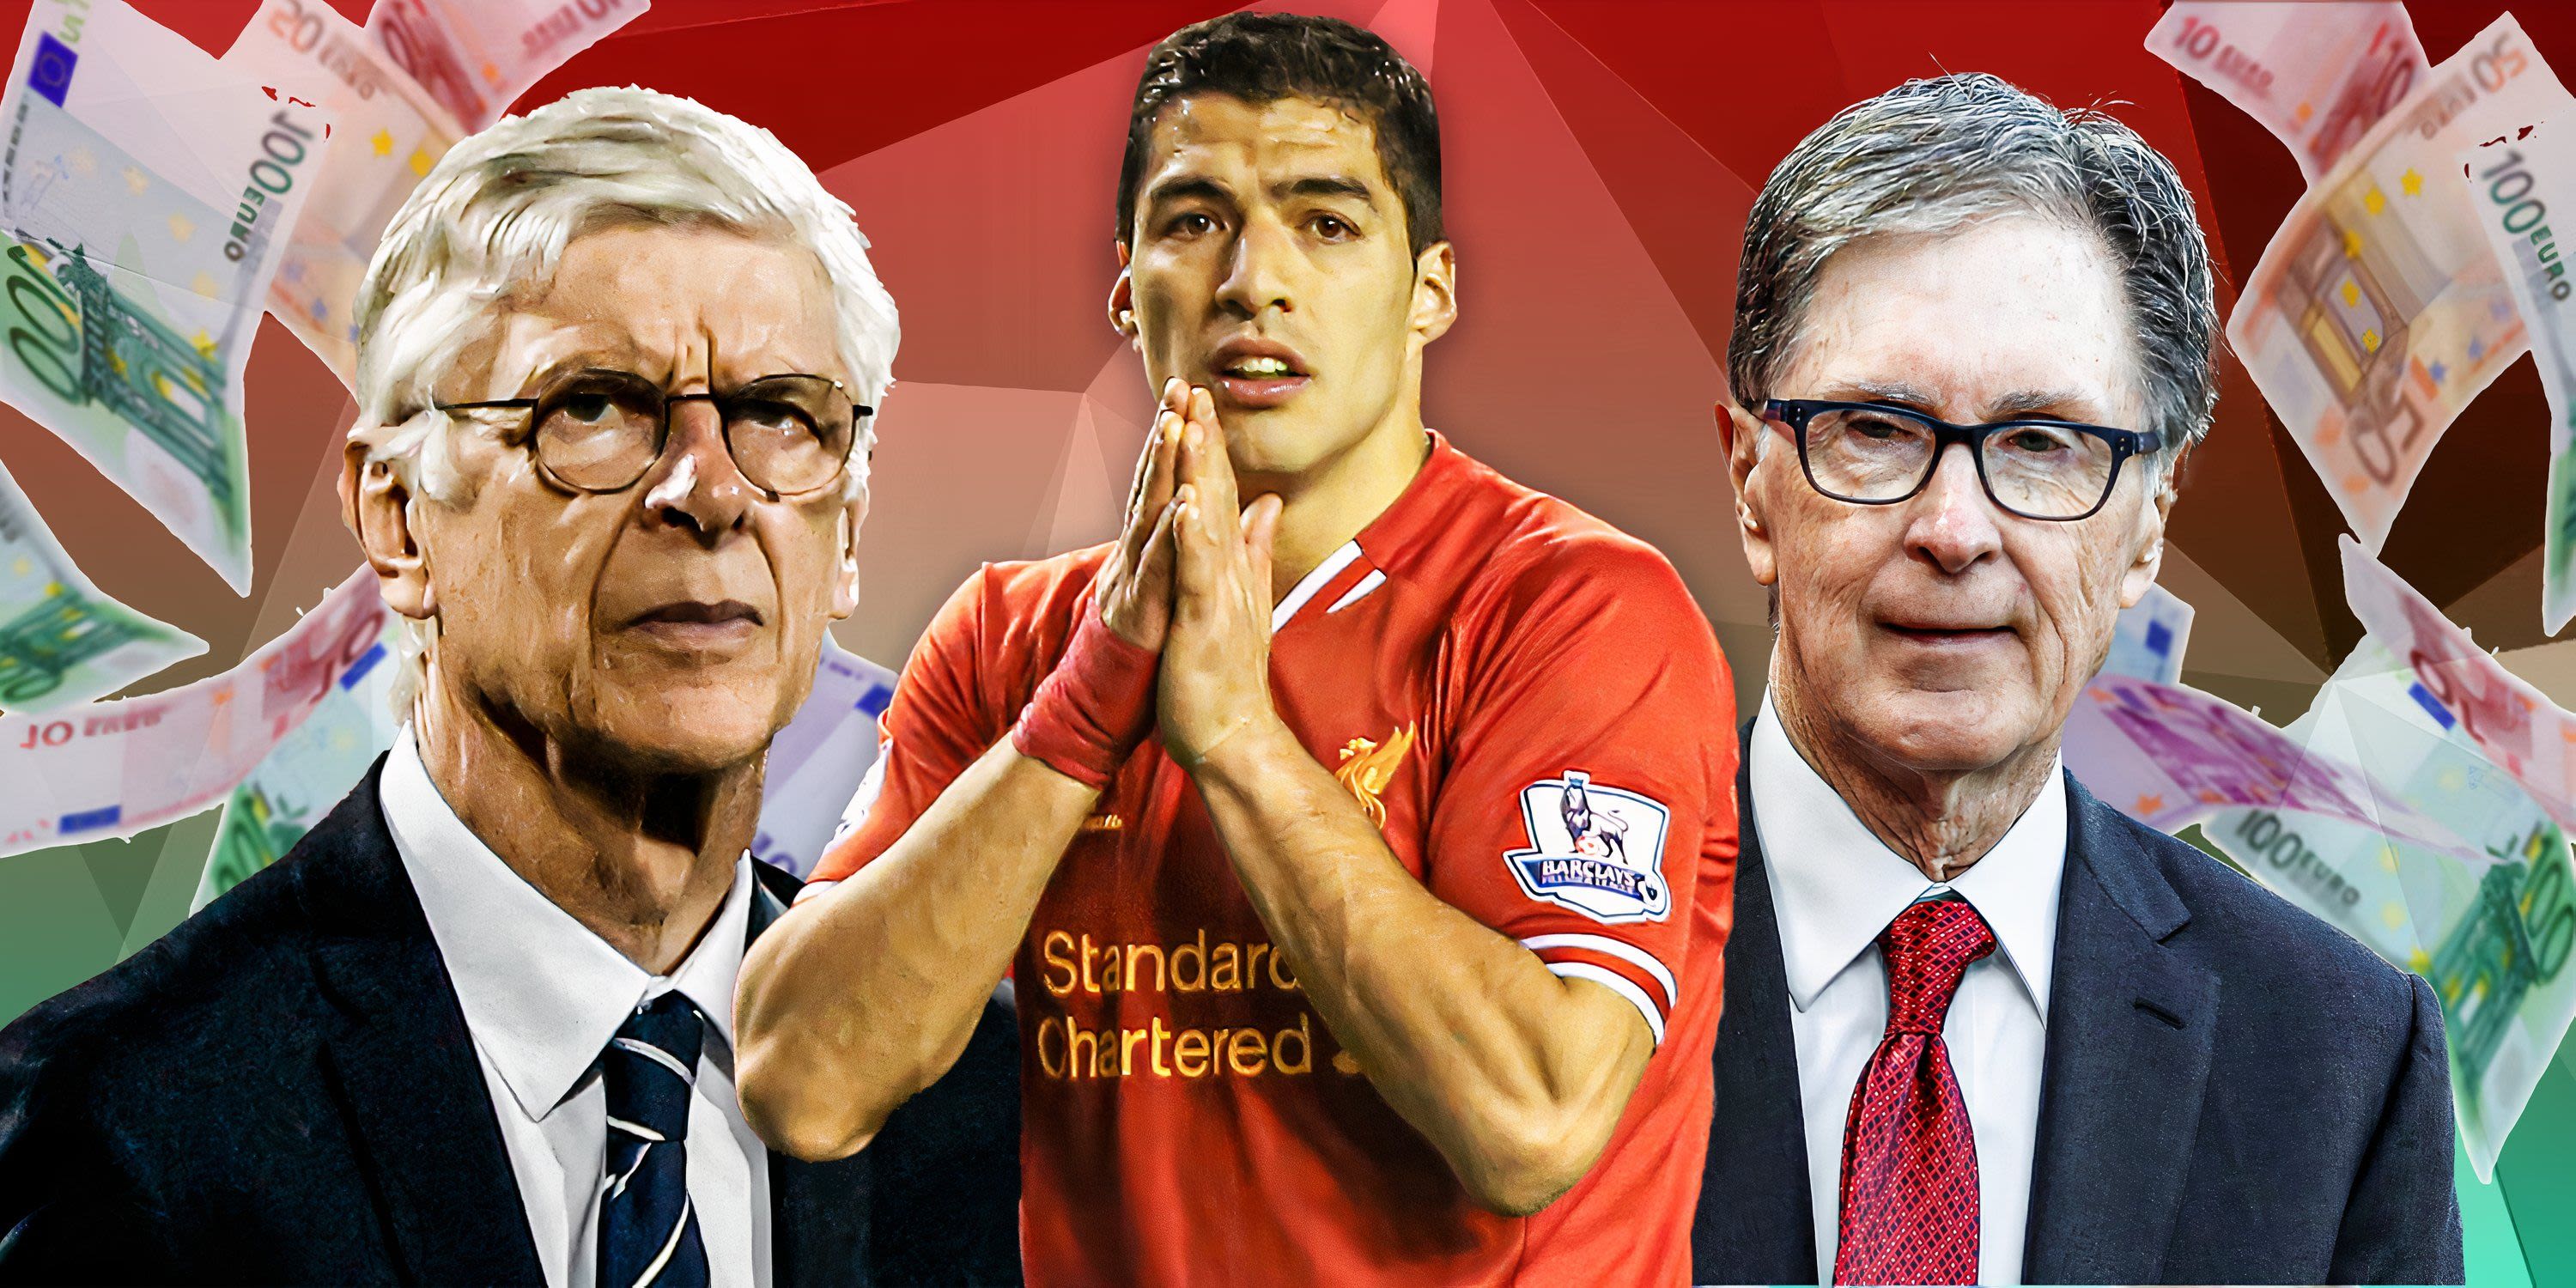 Ex-Arsenal chief explained why they bid £40m+£1 for Luis Suarez - it wasn't the release clause